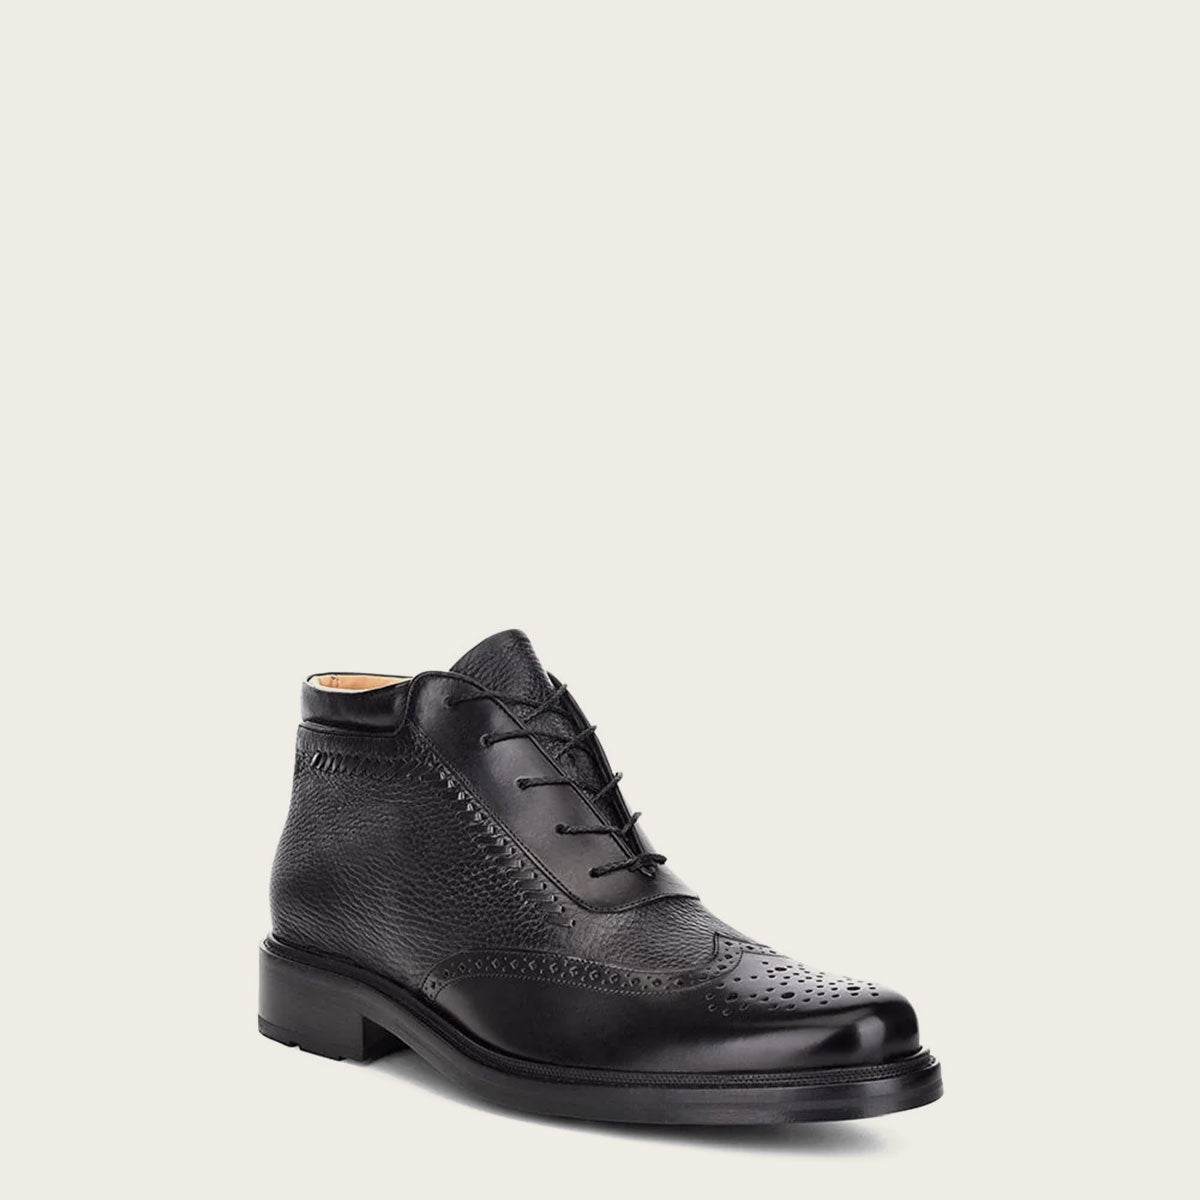 Classic black leather oxford bootie with a sleek and modern design, featuring a lace-up front and a low heel for versatile and comfortable wear